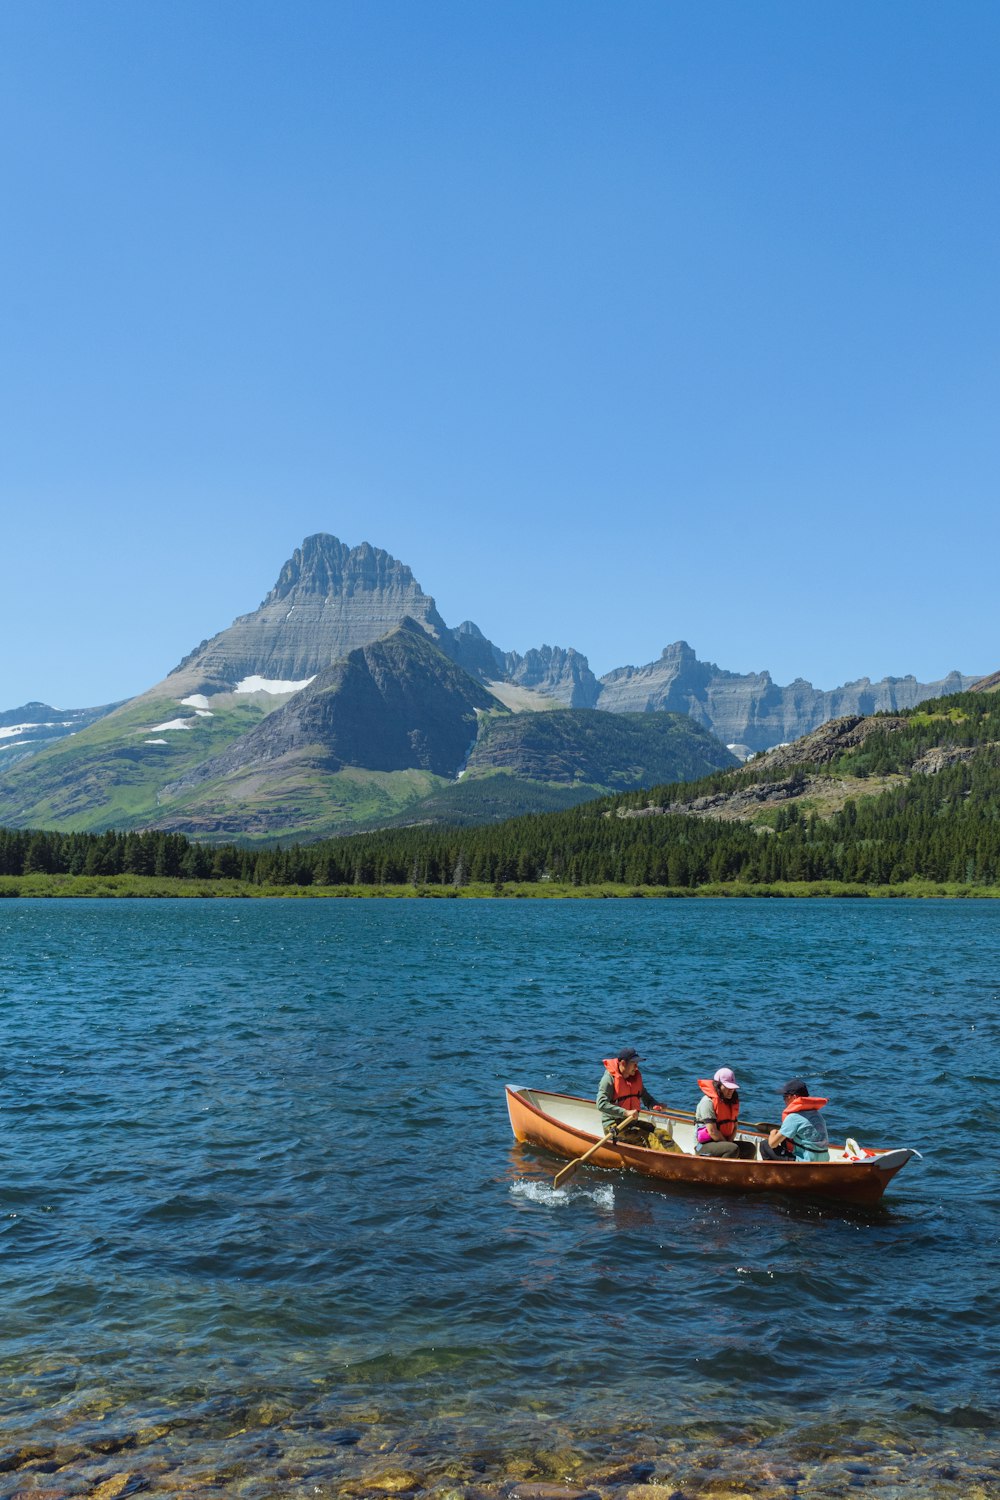 a group of people in a canoe on a lake